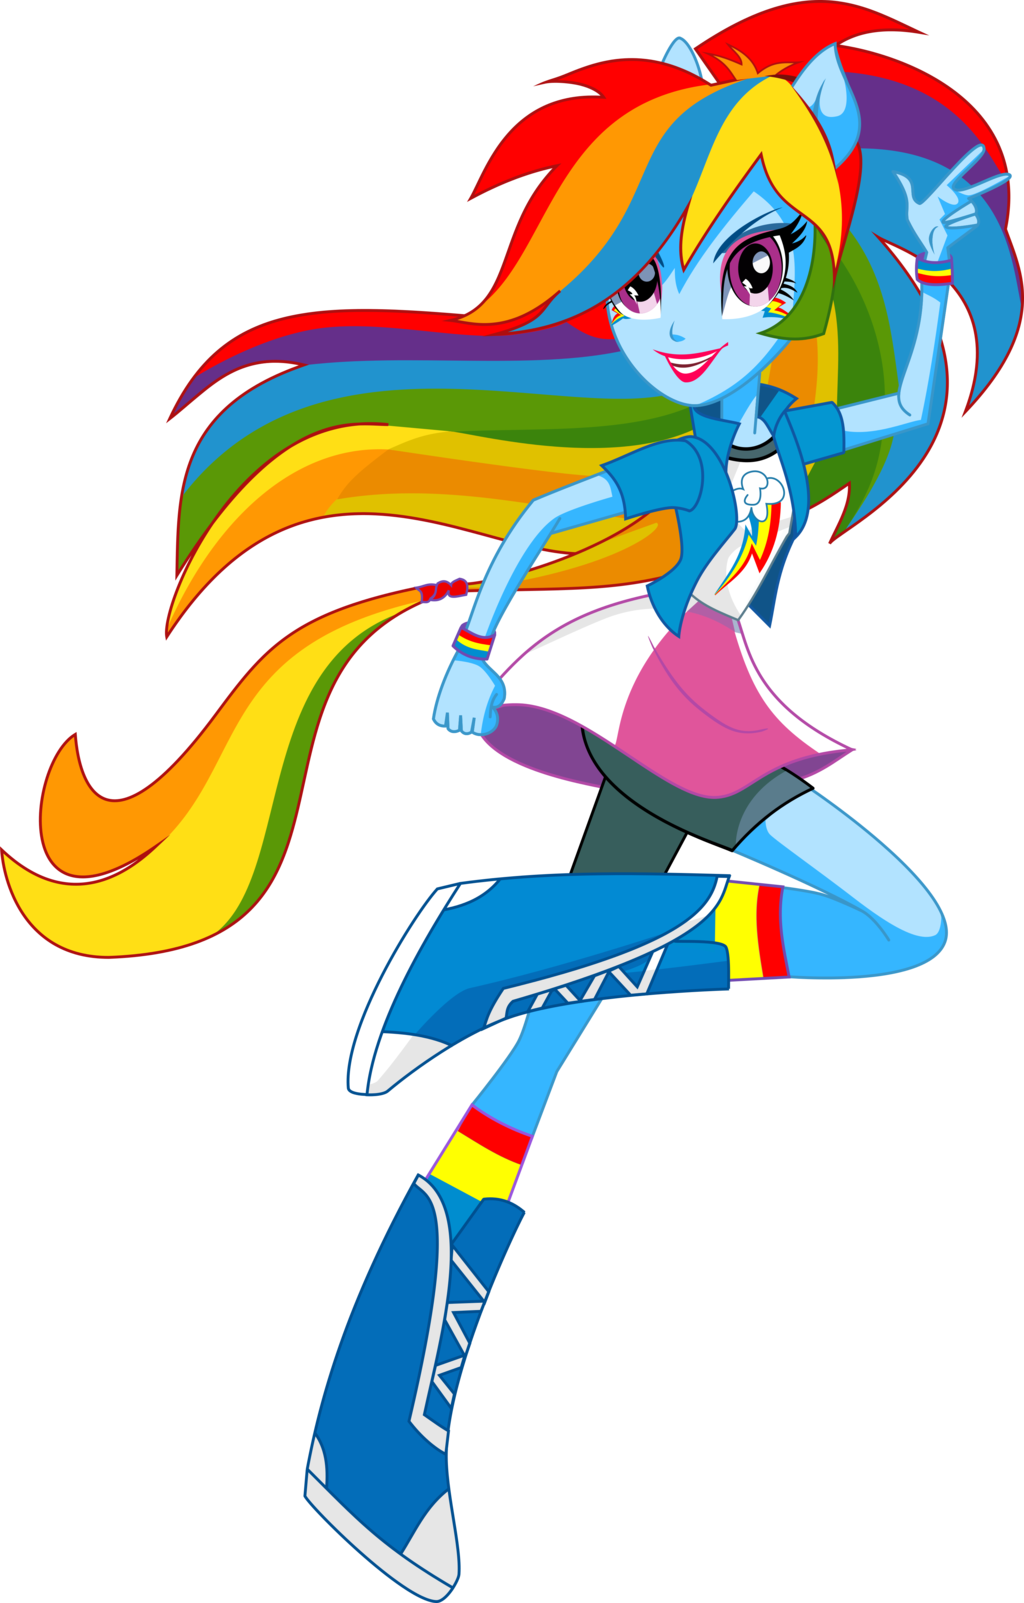 My Little Pony Coloring Pages Rarity In Dress For Kids - Equestria Girls Rainbow Dash (1024x1603)